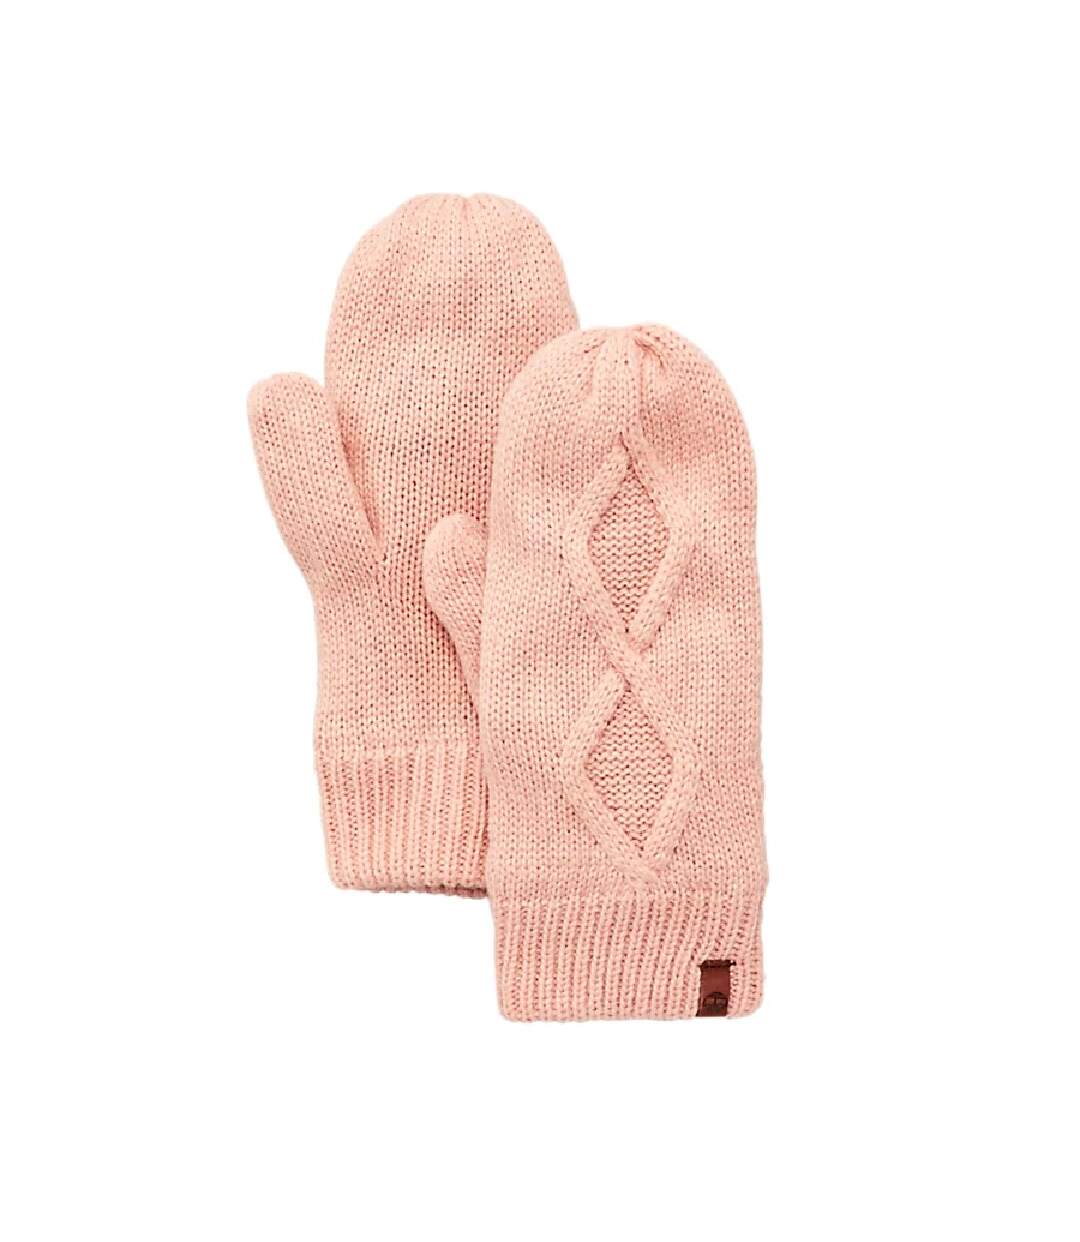 Timberland Womens/Ladies Leather Loop Cable Knit Mittens (Peach) - UTUT445